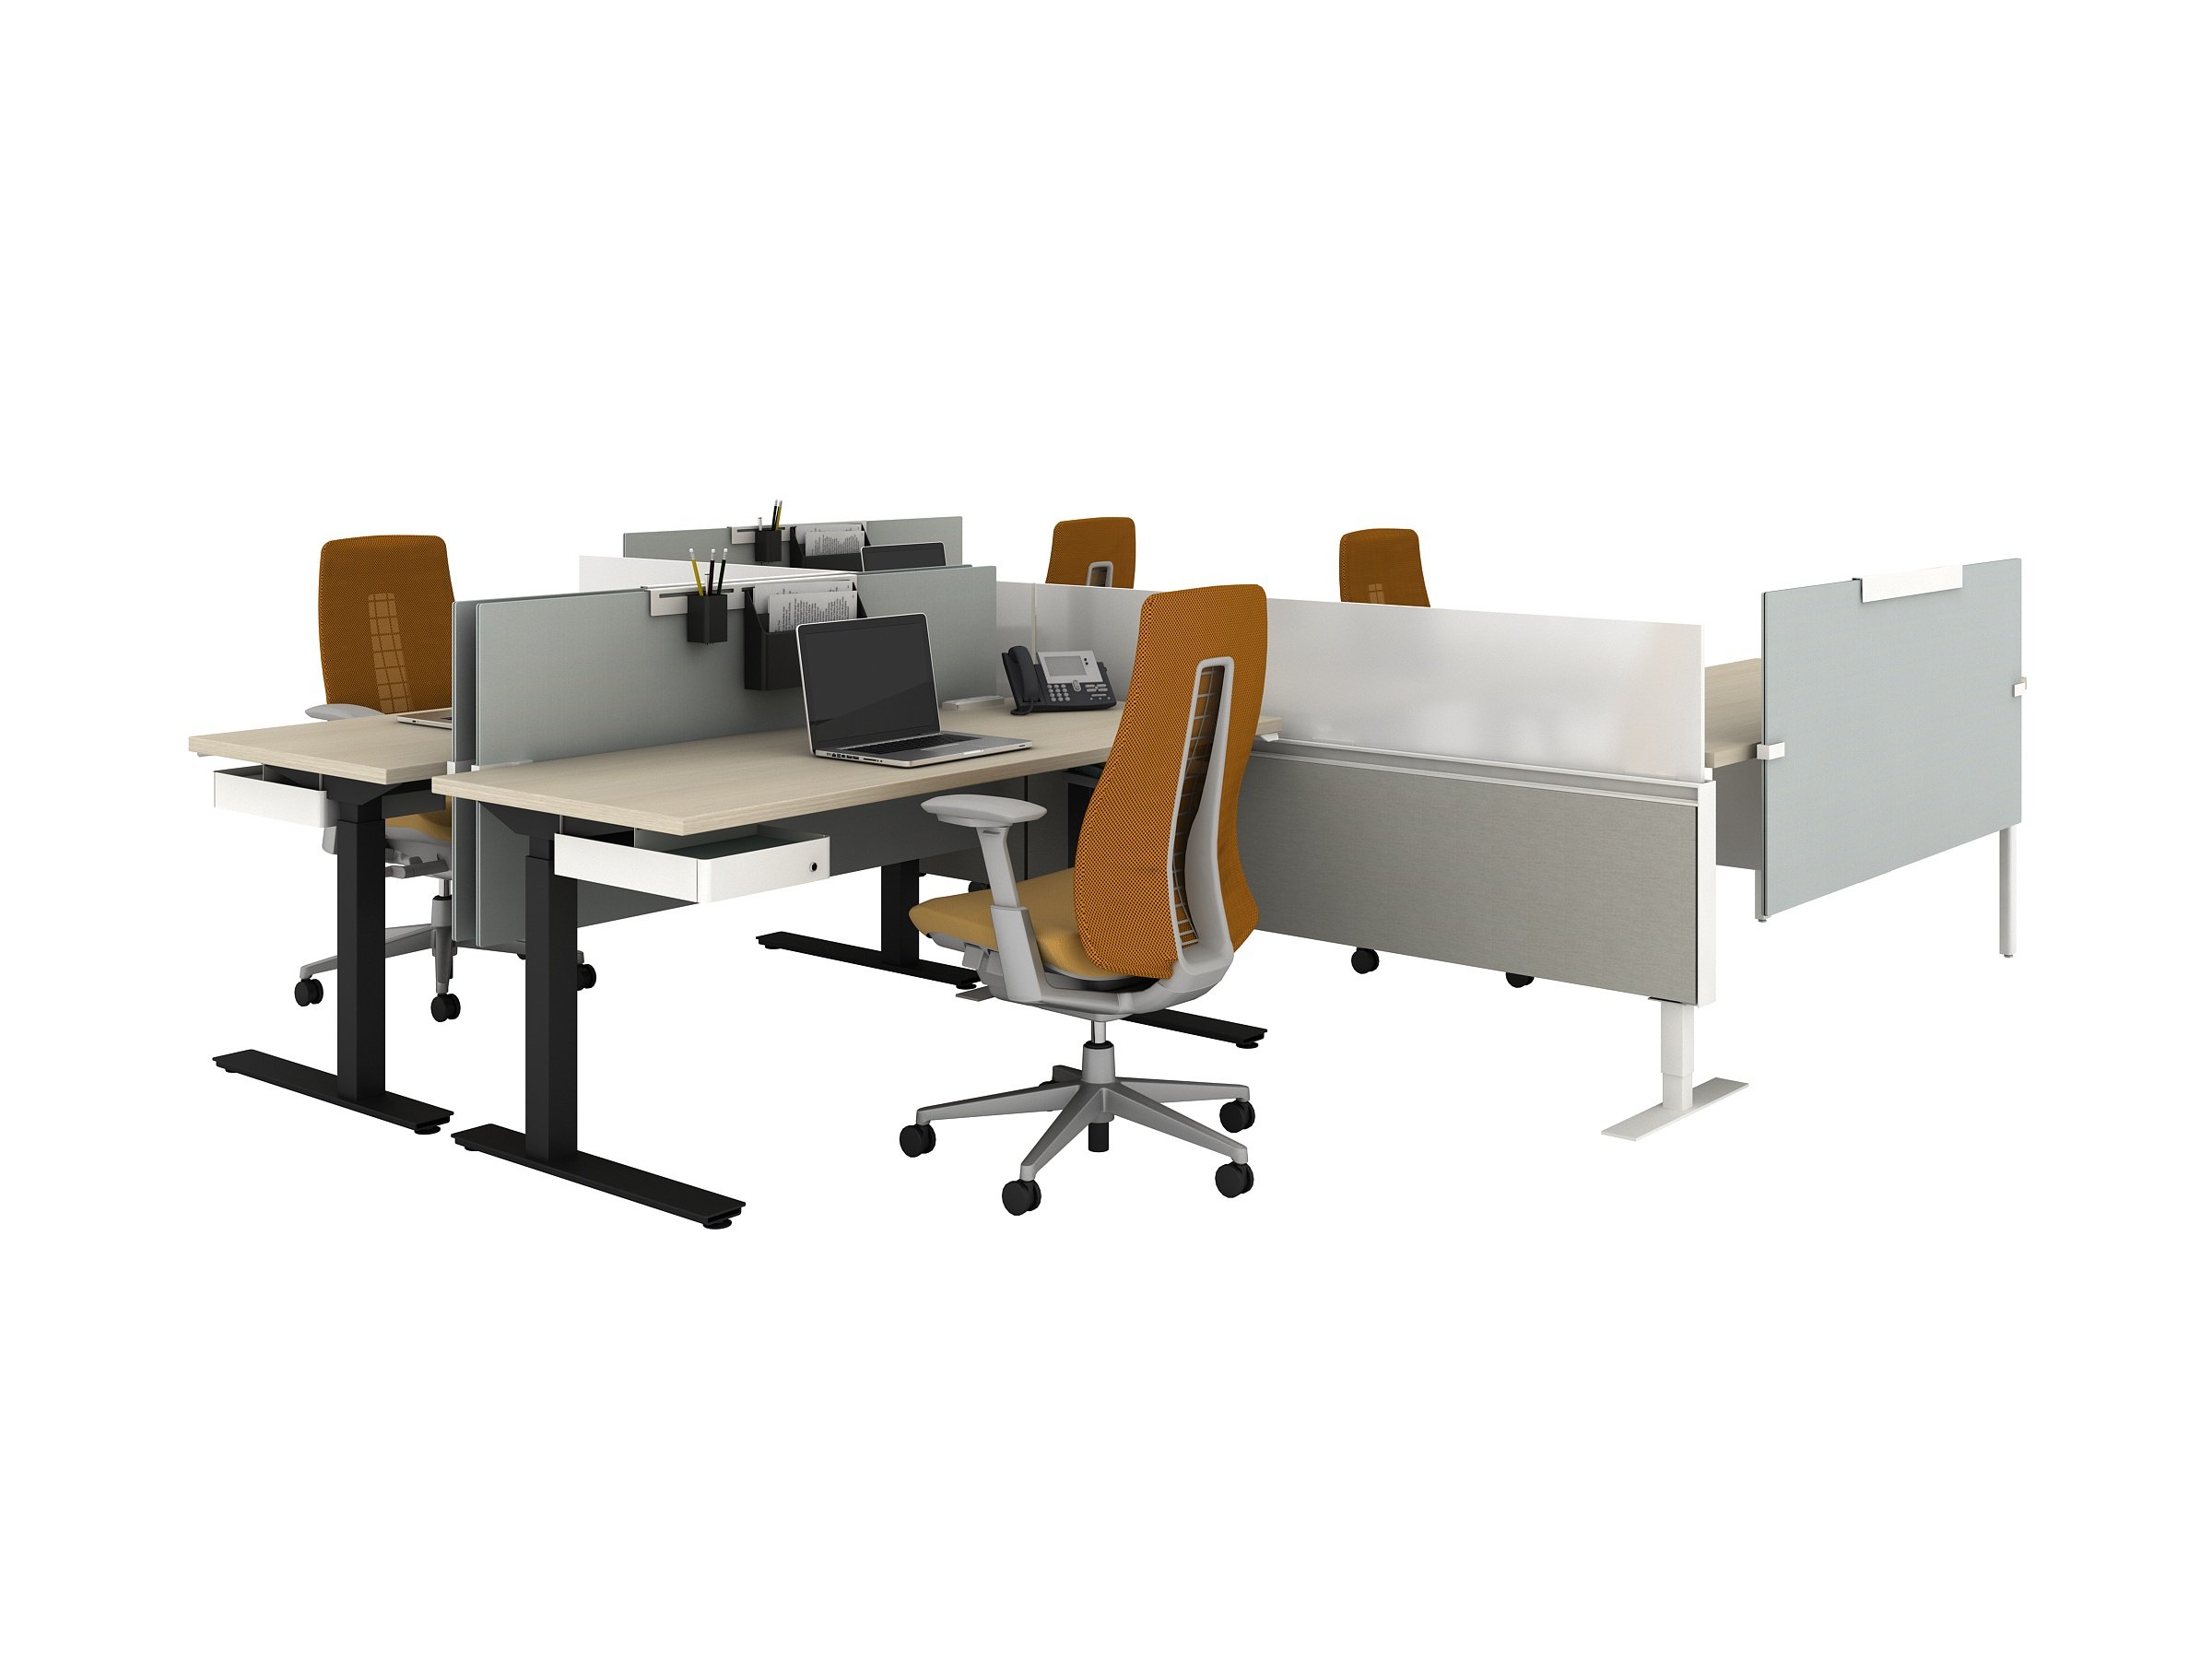 Haworth Compose Connections workspace divider in grey with fern task chair and Hop HAT in office mock up